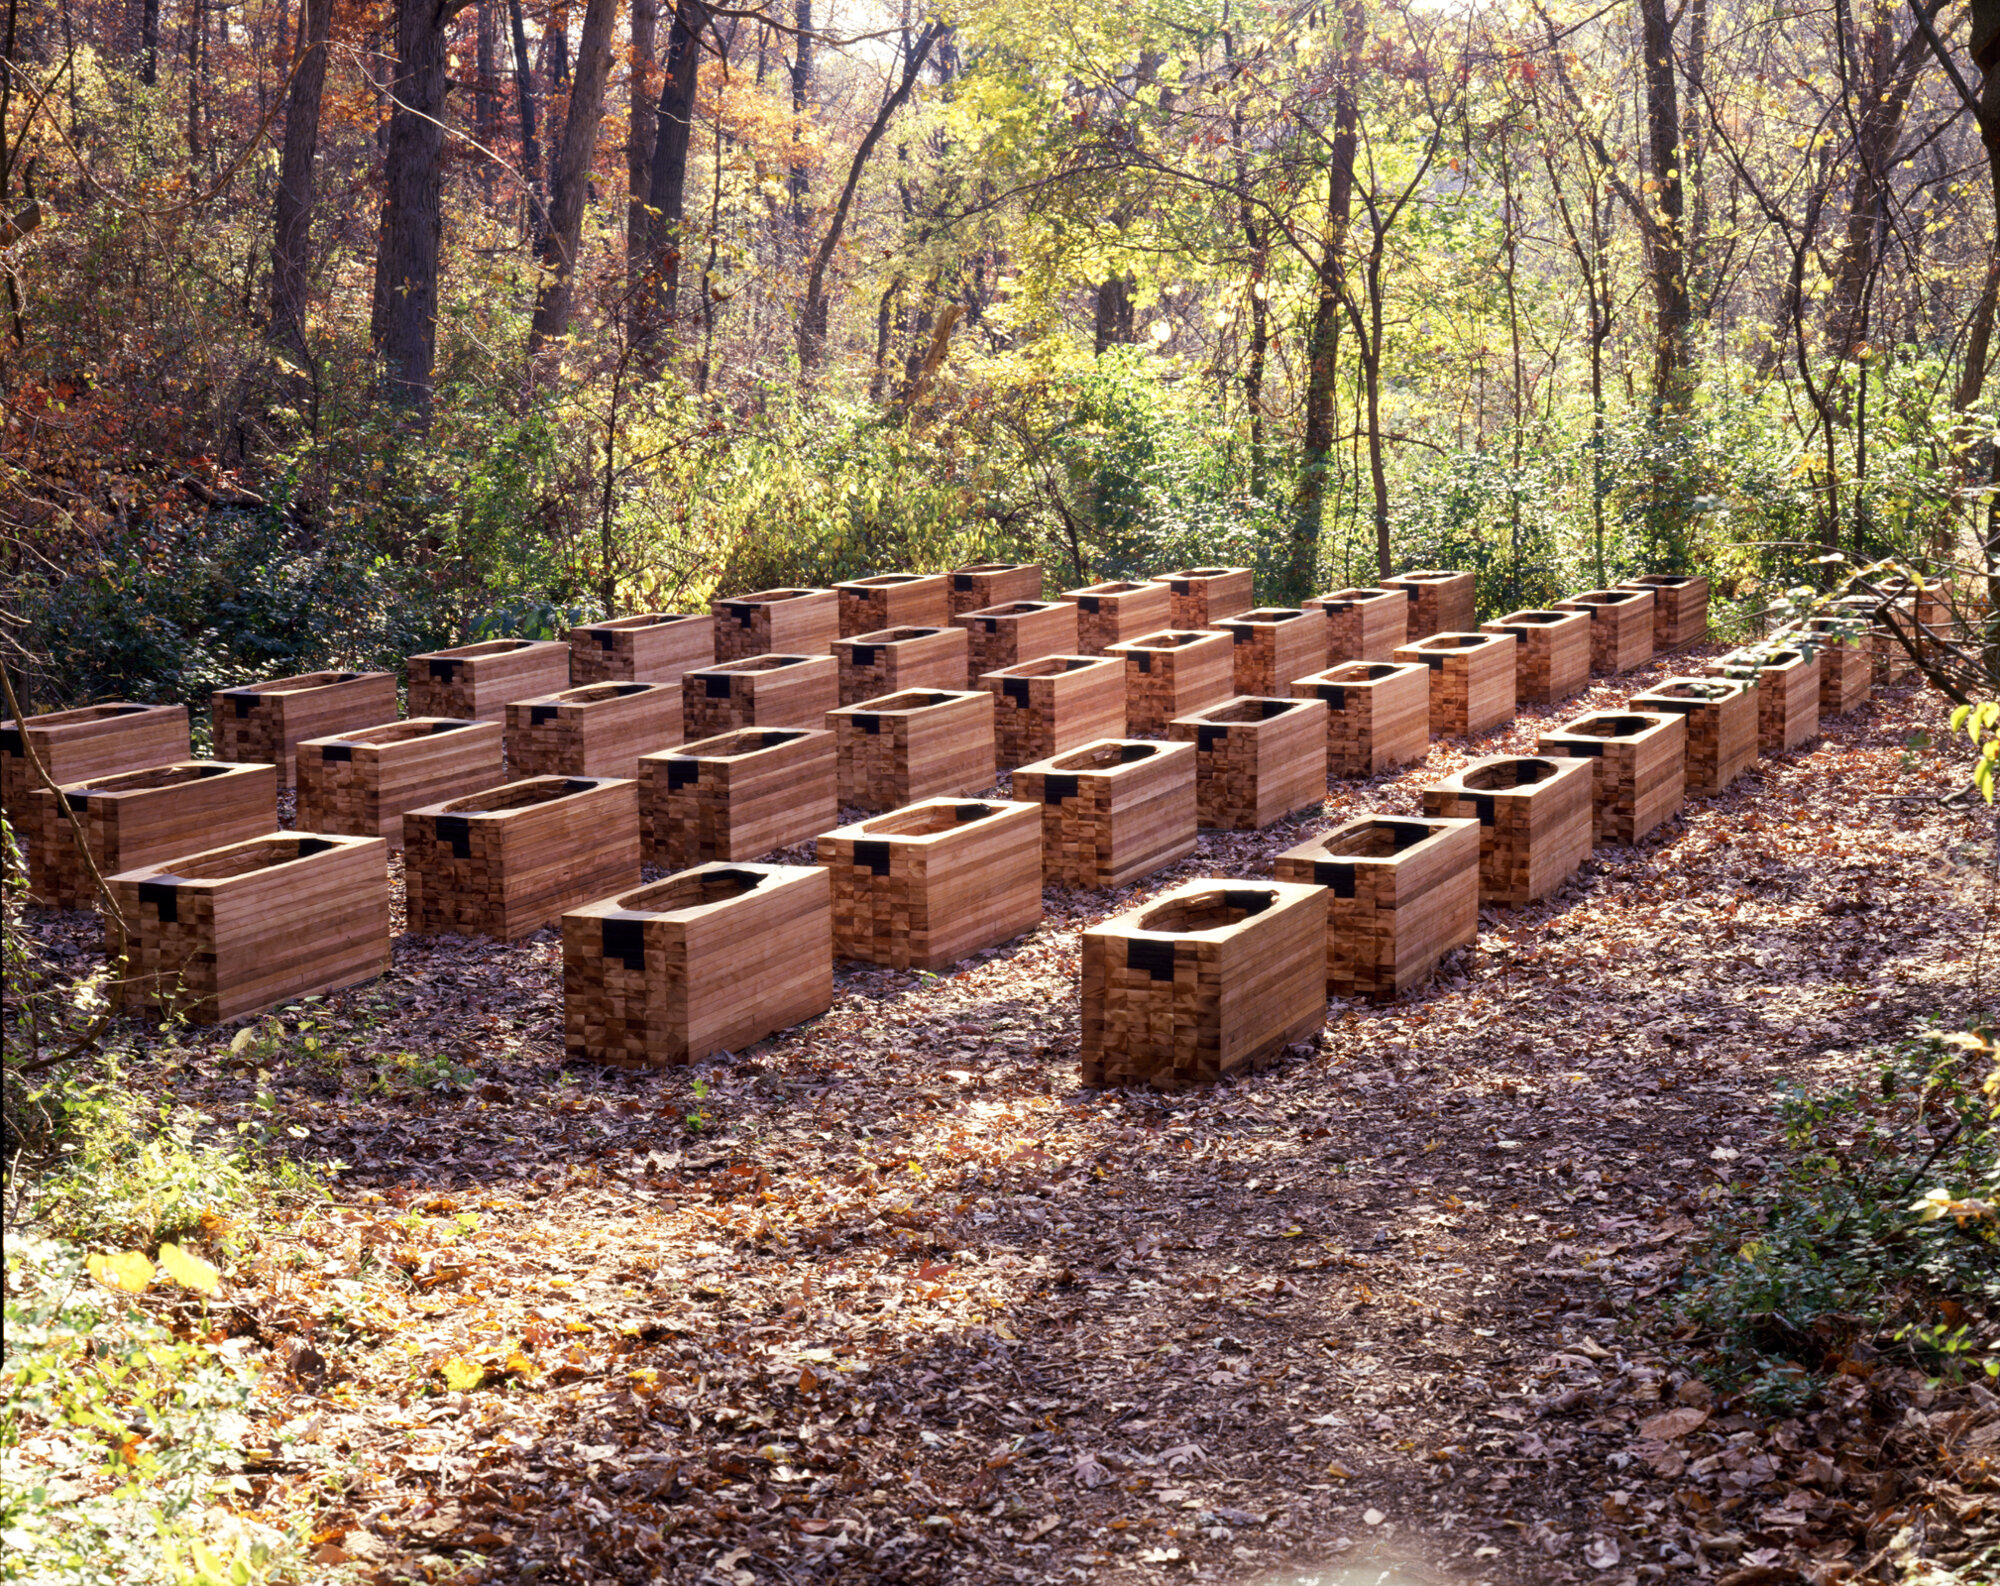       Untitled (45 Tubs) , 1988-1989 Cedar and rubber 24 x 792 x 360 in.    MORE IMAGES   Laumeier Sculpture Park  